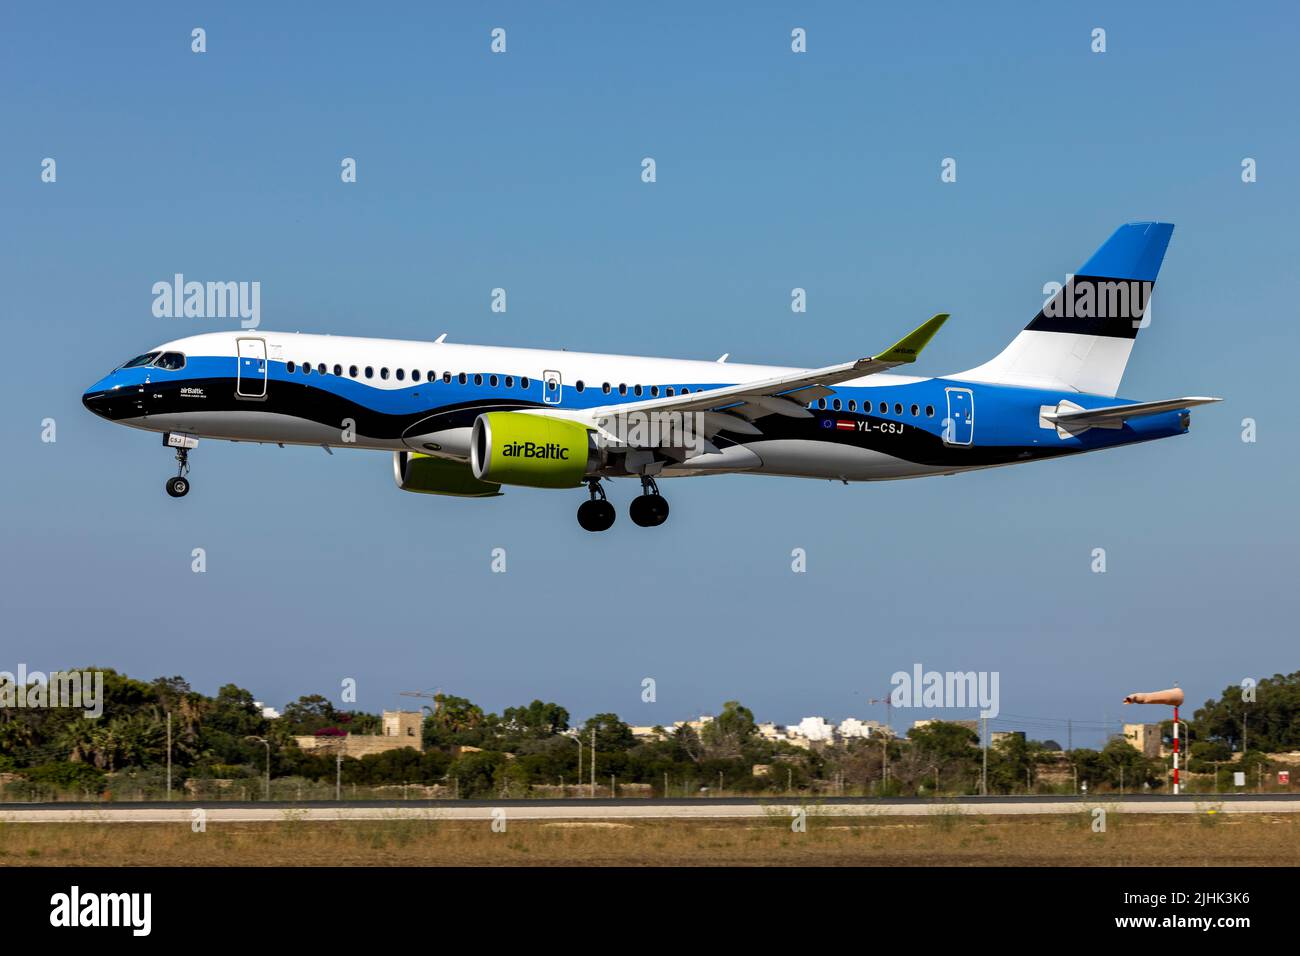 Air Baltic Airbus A220-300 (REG: YL-CSJ) in the Estonian Flag special livery, on short final for runway 31. Stock Photo